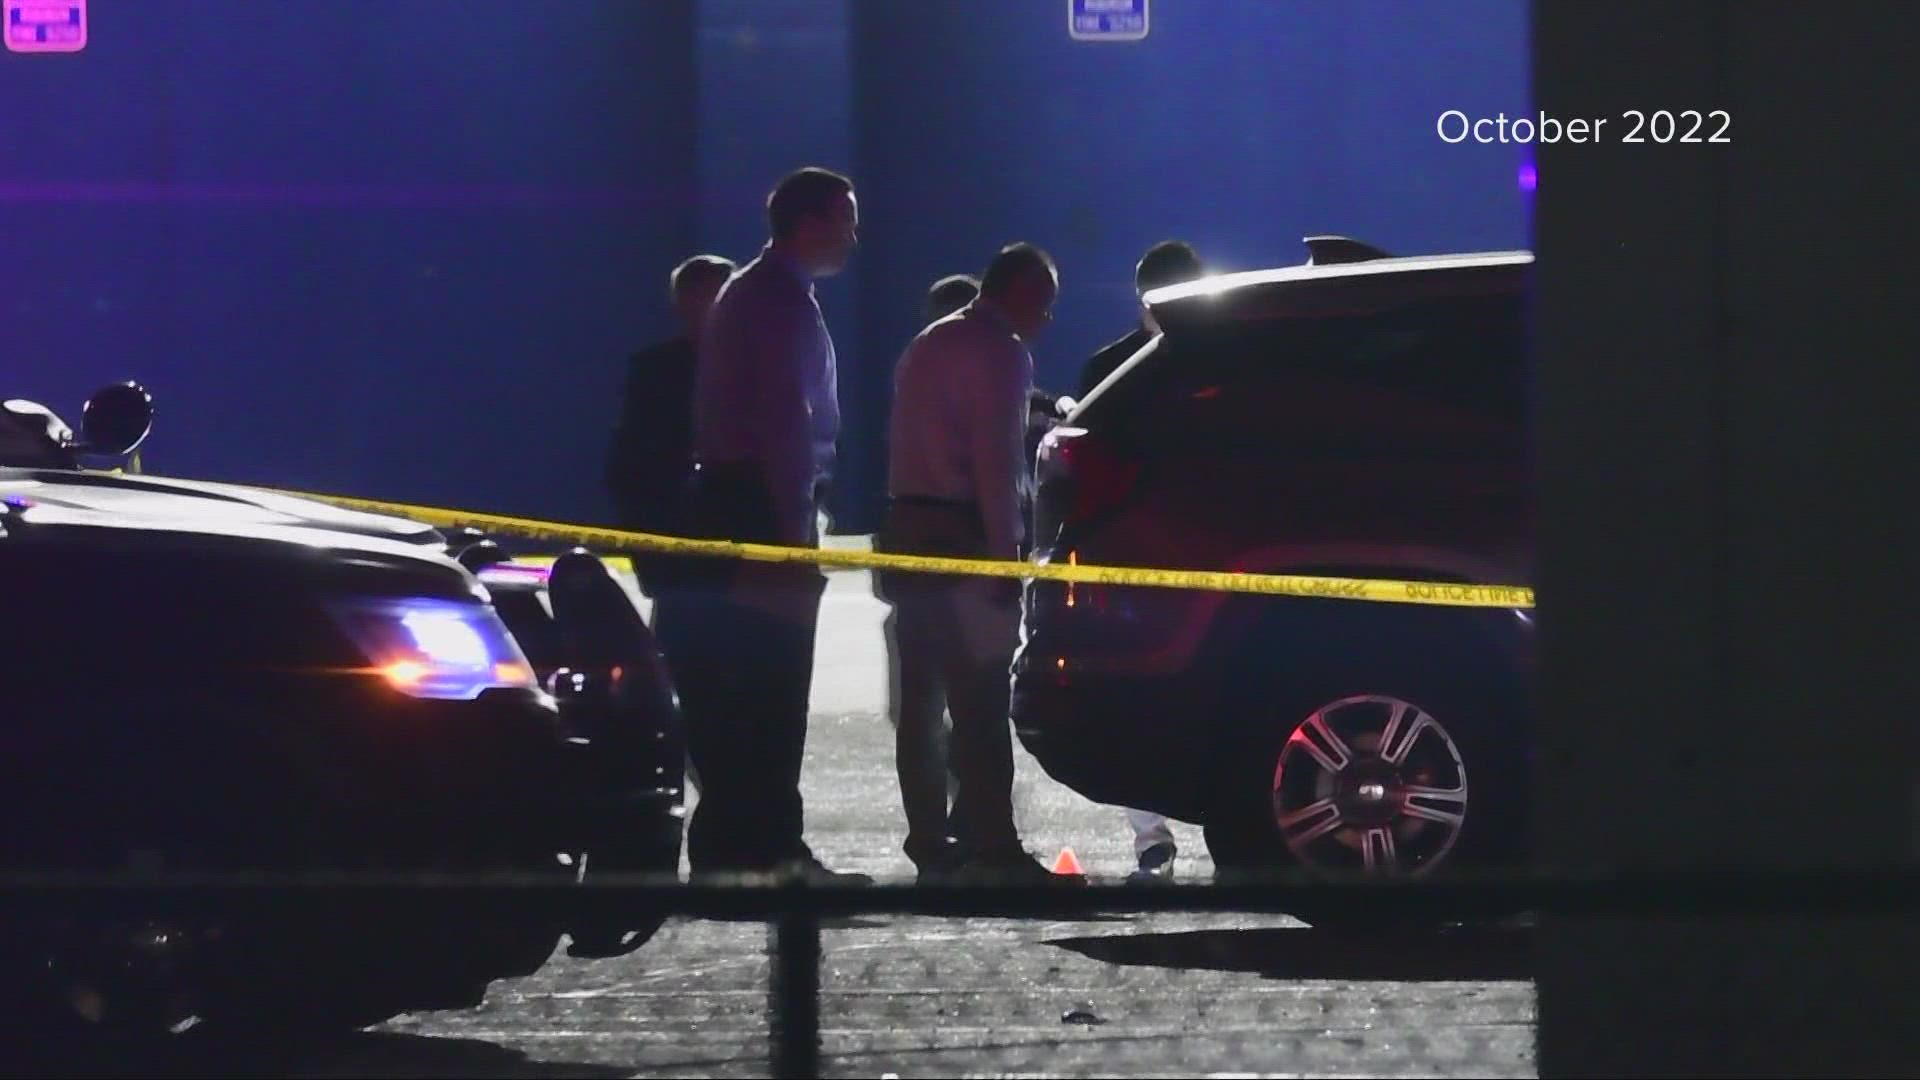 The Sacramento Police Department arrested a 15-year-old male in connection with a deadly shooting at Grant High School's parking lot in October.